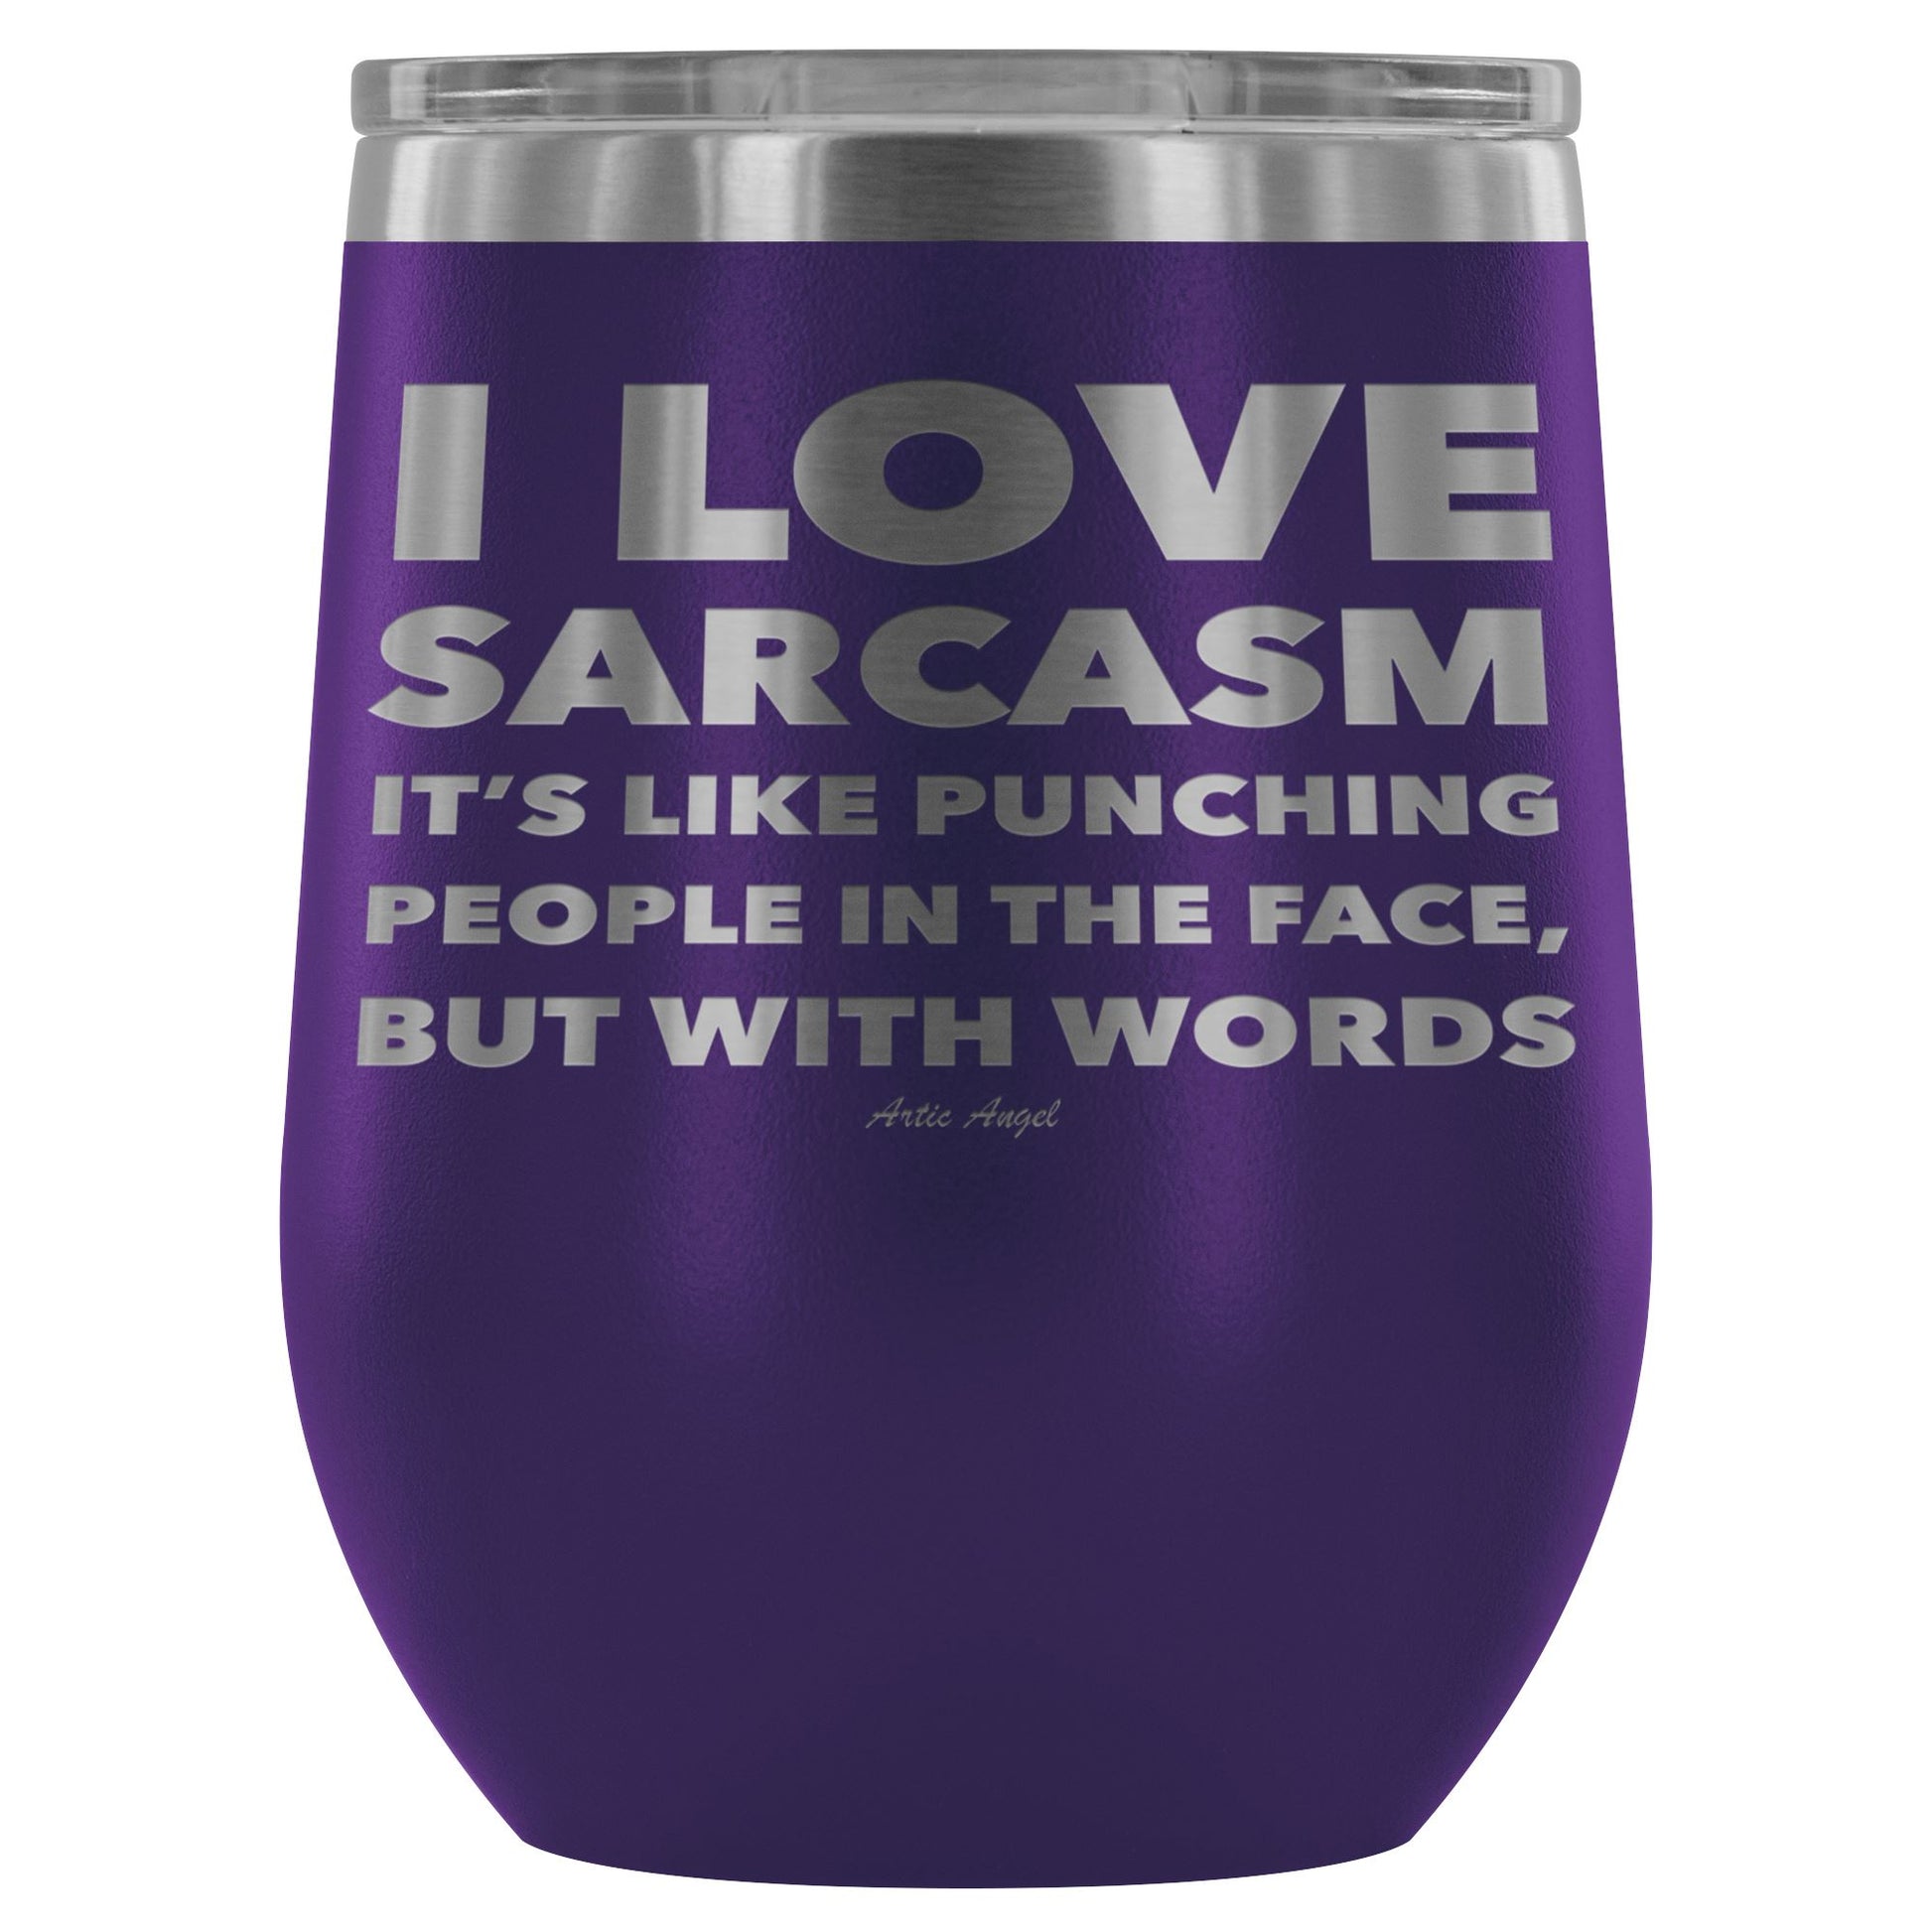 "I Love Sarcasm It's Like Punching People In The Face, But With Words" - Stemless Wine Cup Wine Tumbler Purple 